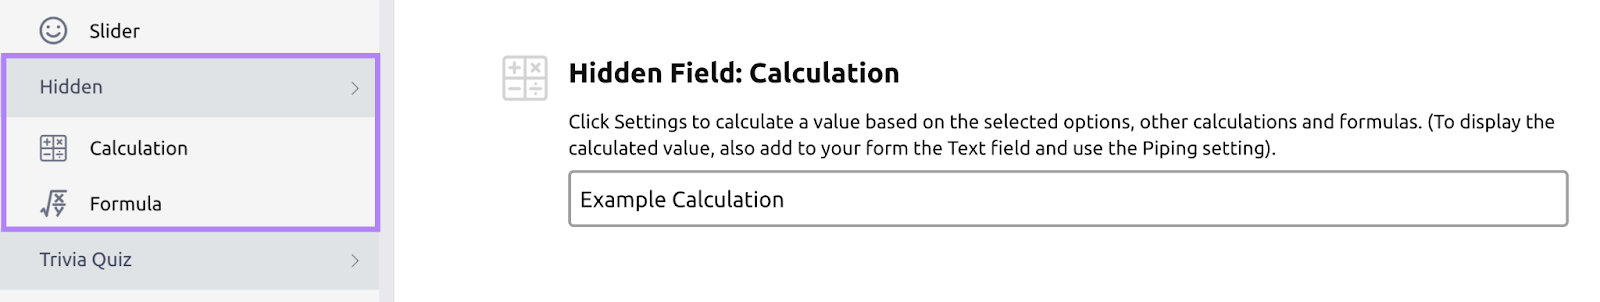 "Hidden Field: Calculation” added in Lead Generation Forms builder